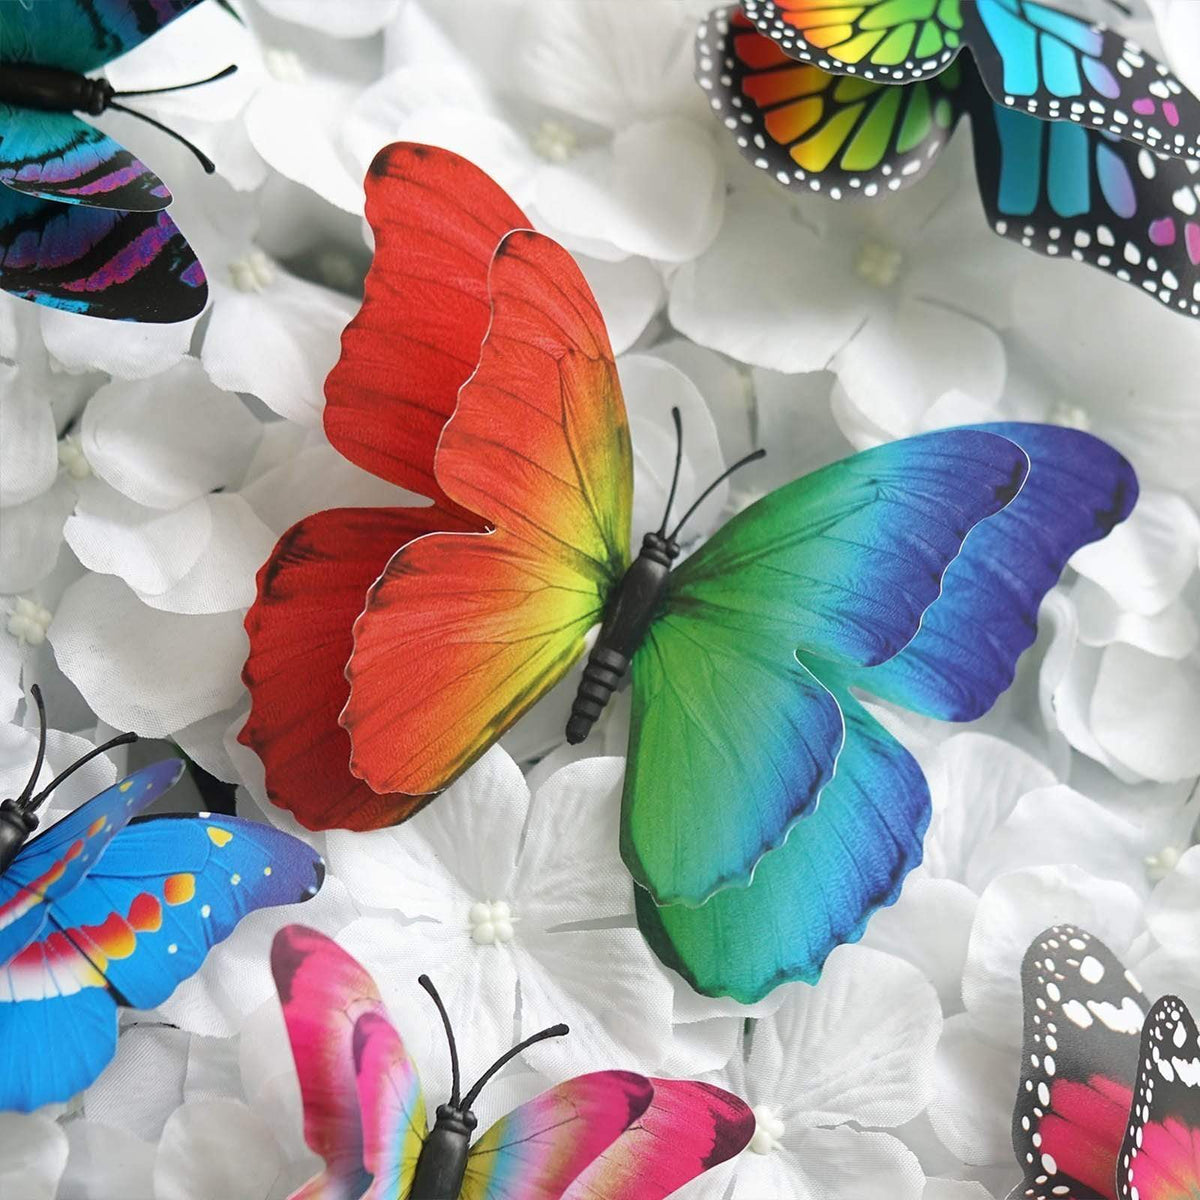 12 pcs Multicolored 3D Butterflies Stickers DIY Crafts Wall Decals